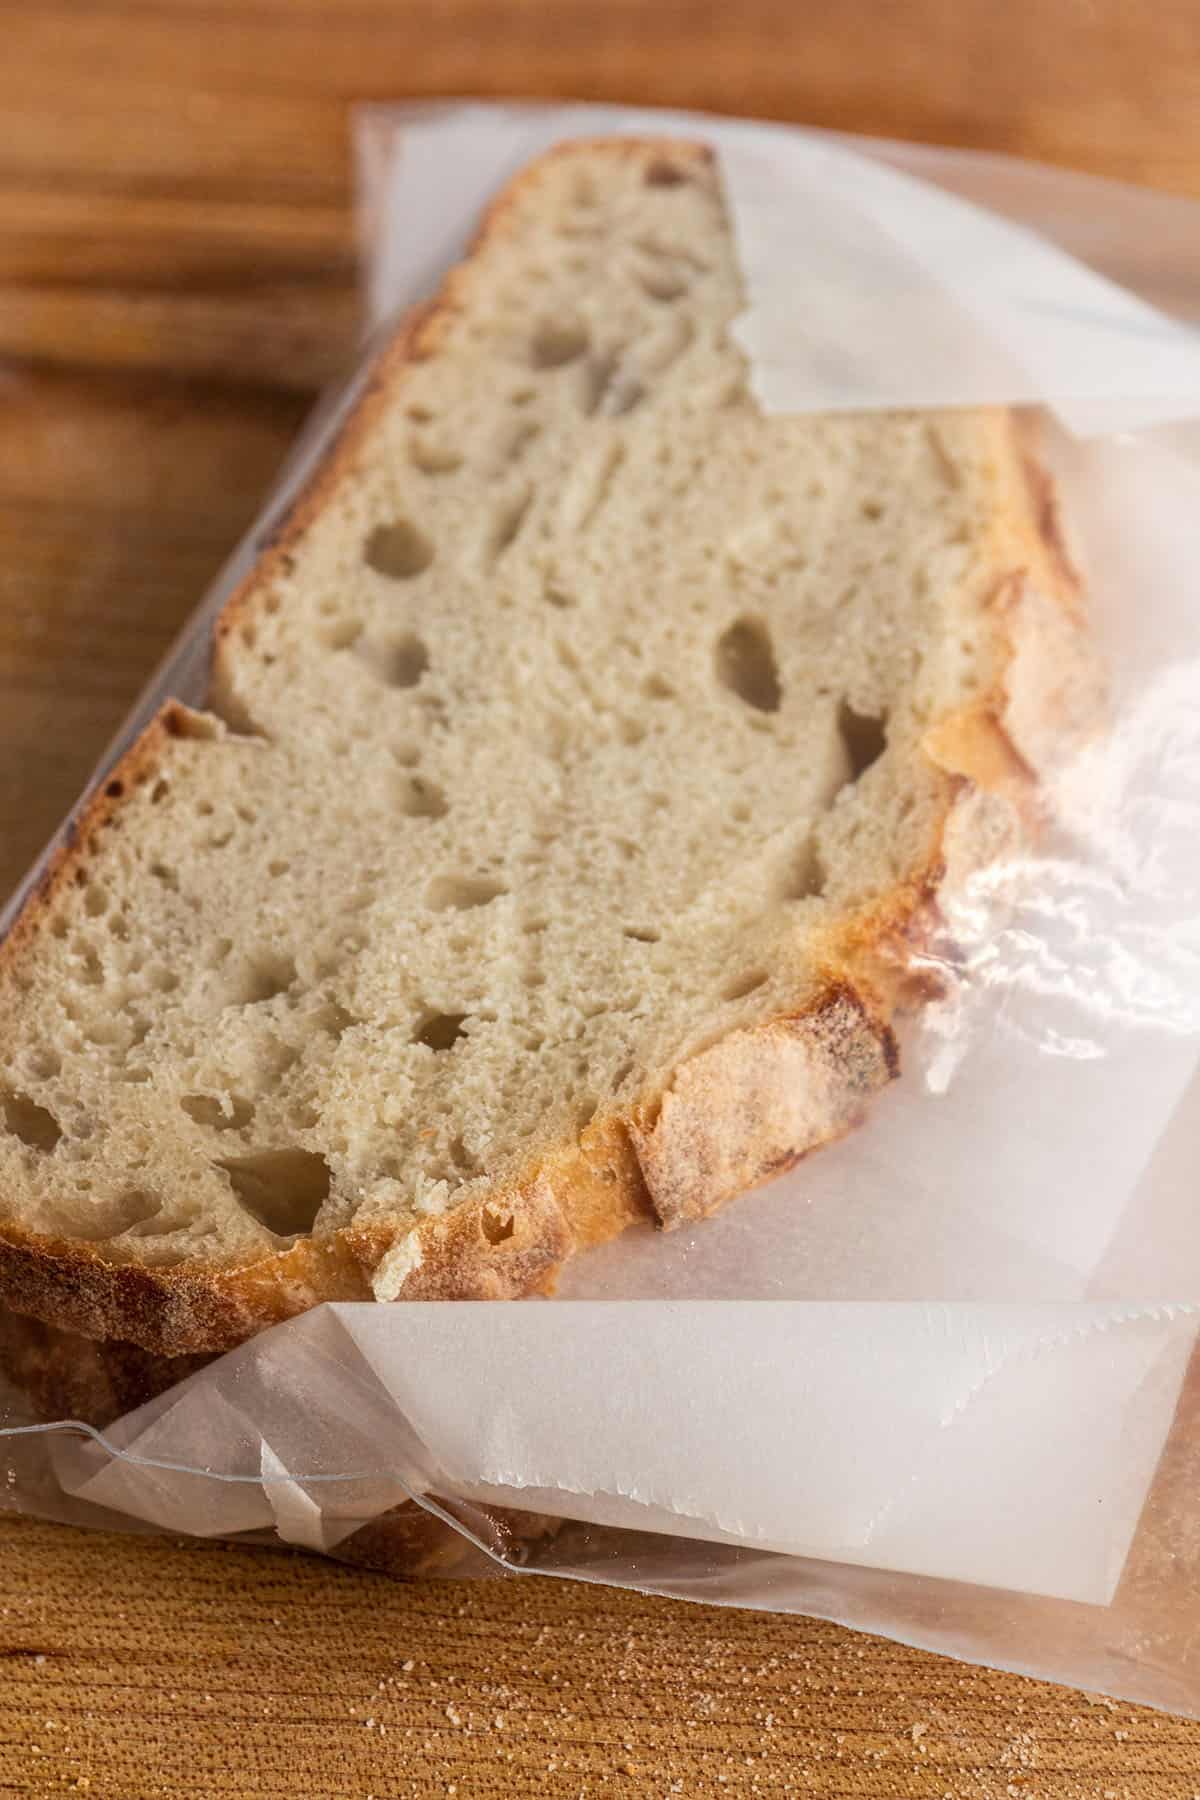 Slices of sourdough bread with parchment paper in between.